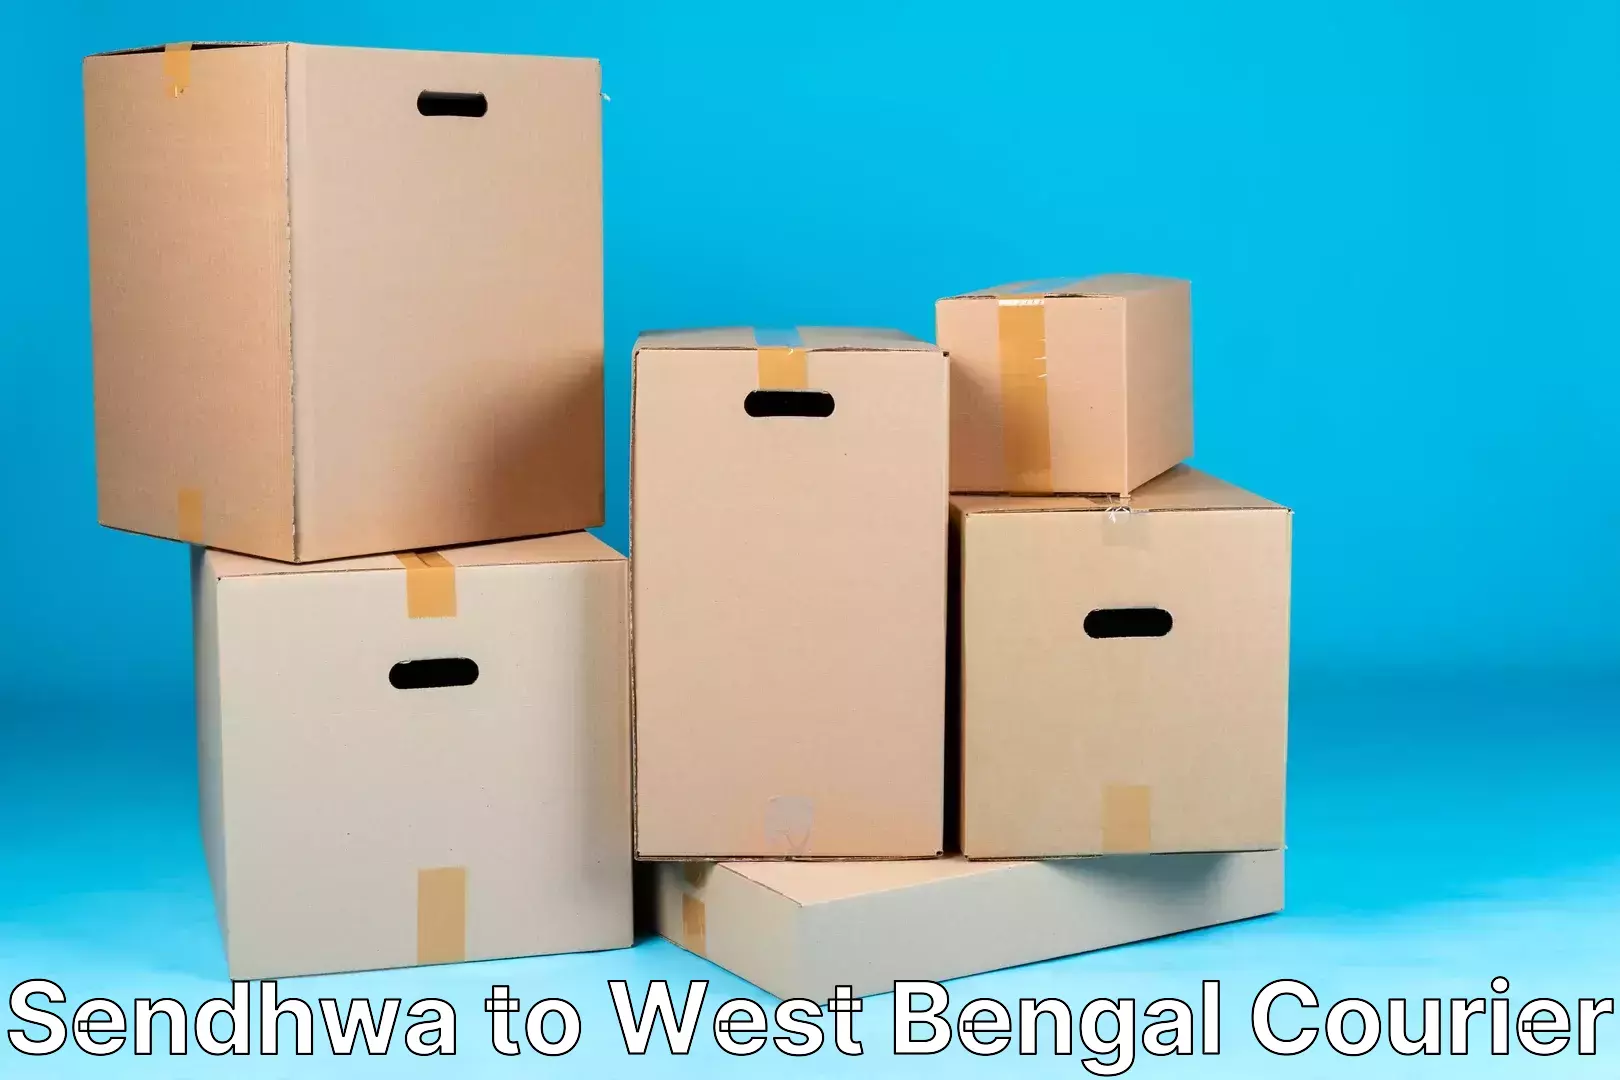 Luggage delivery app Sendhwa to West Bengal